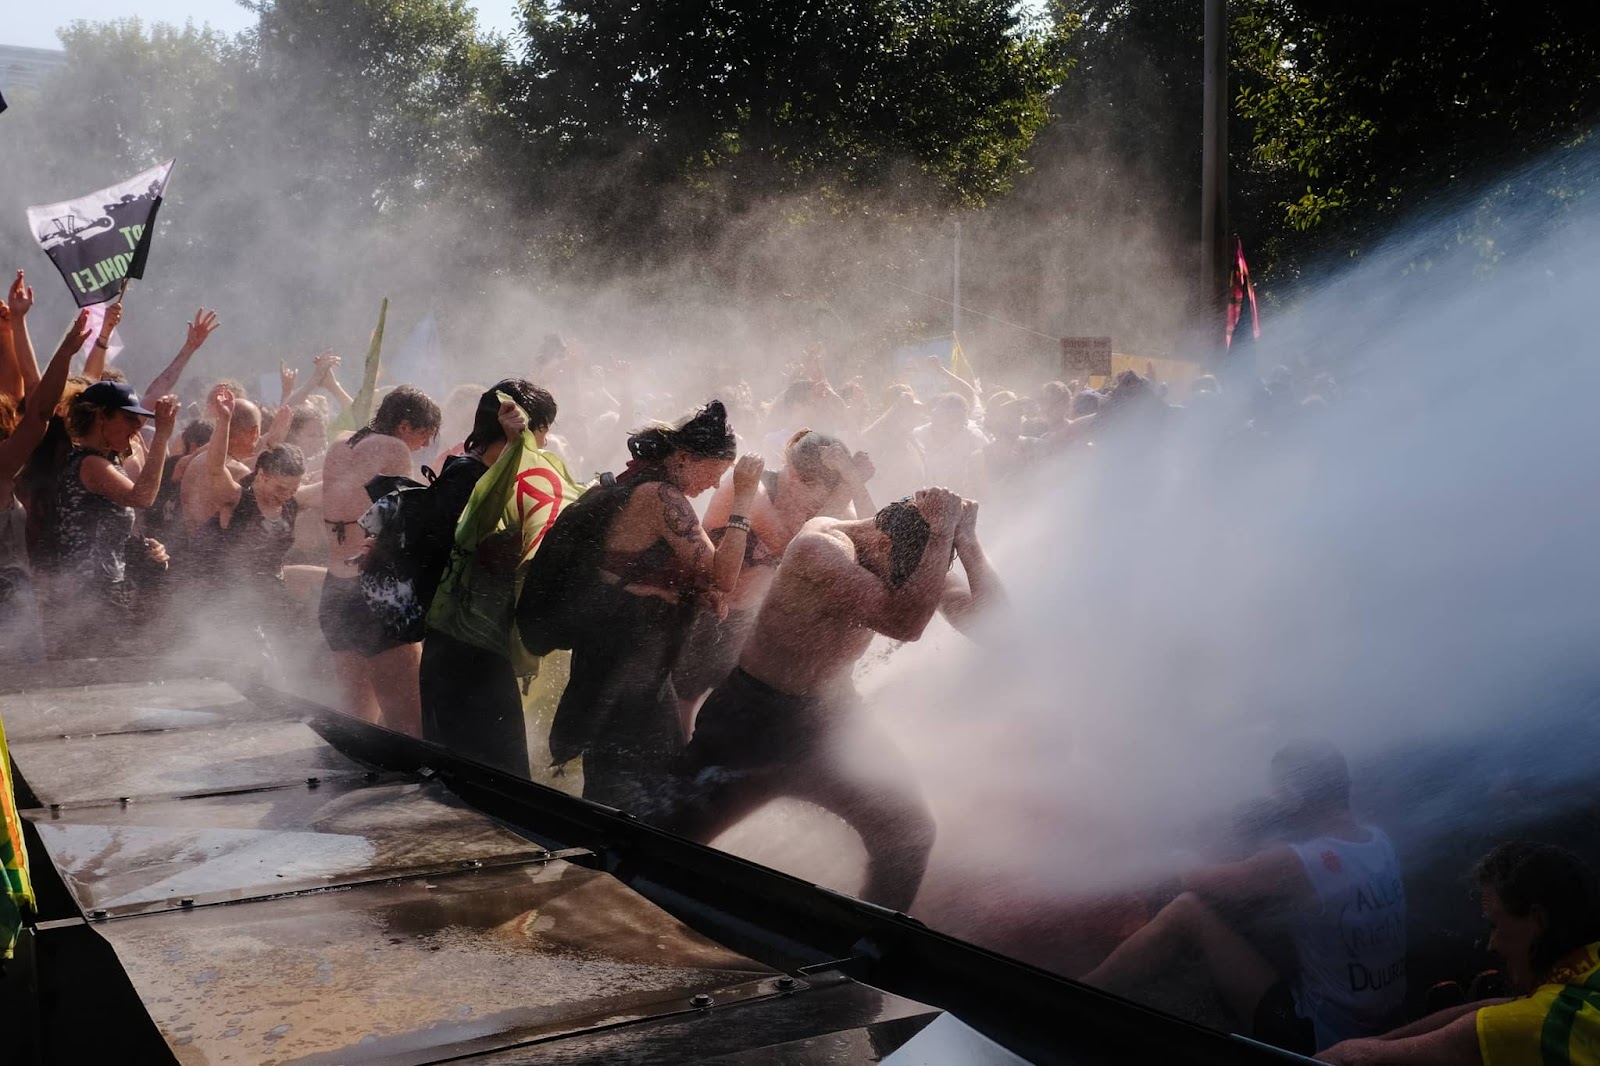 Rebels brace themselves as they are hit by a torrent of water from a police cannon